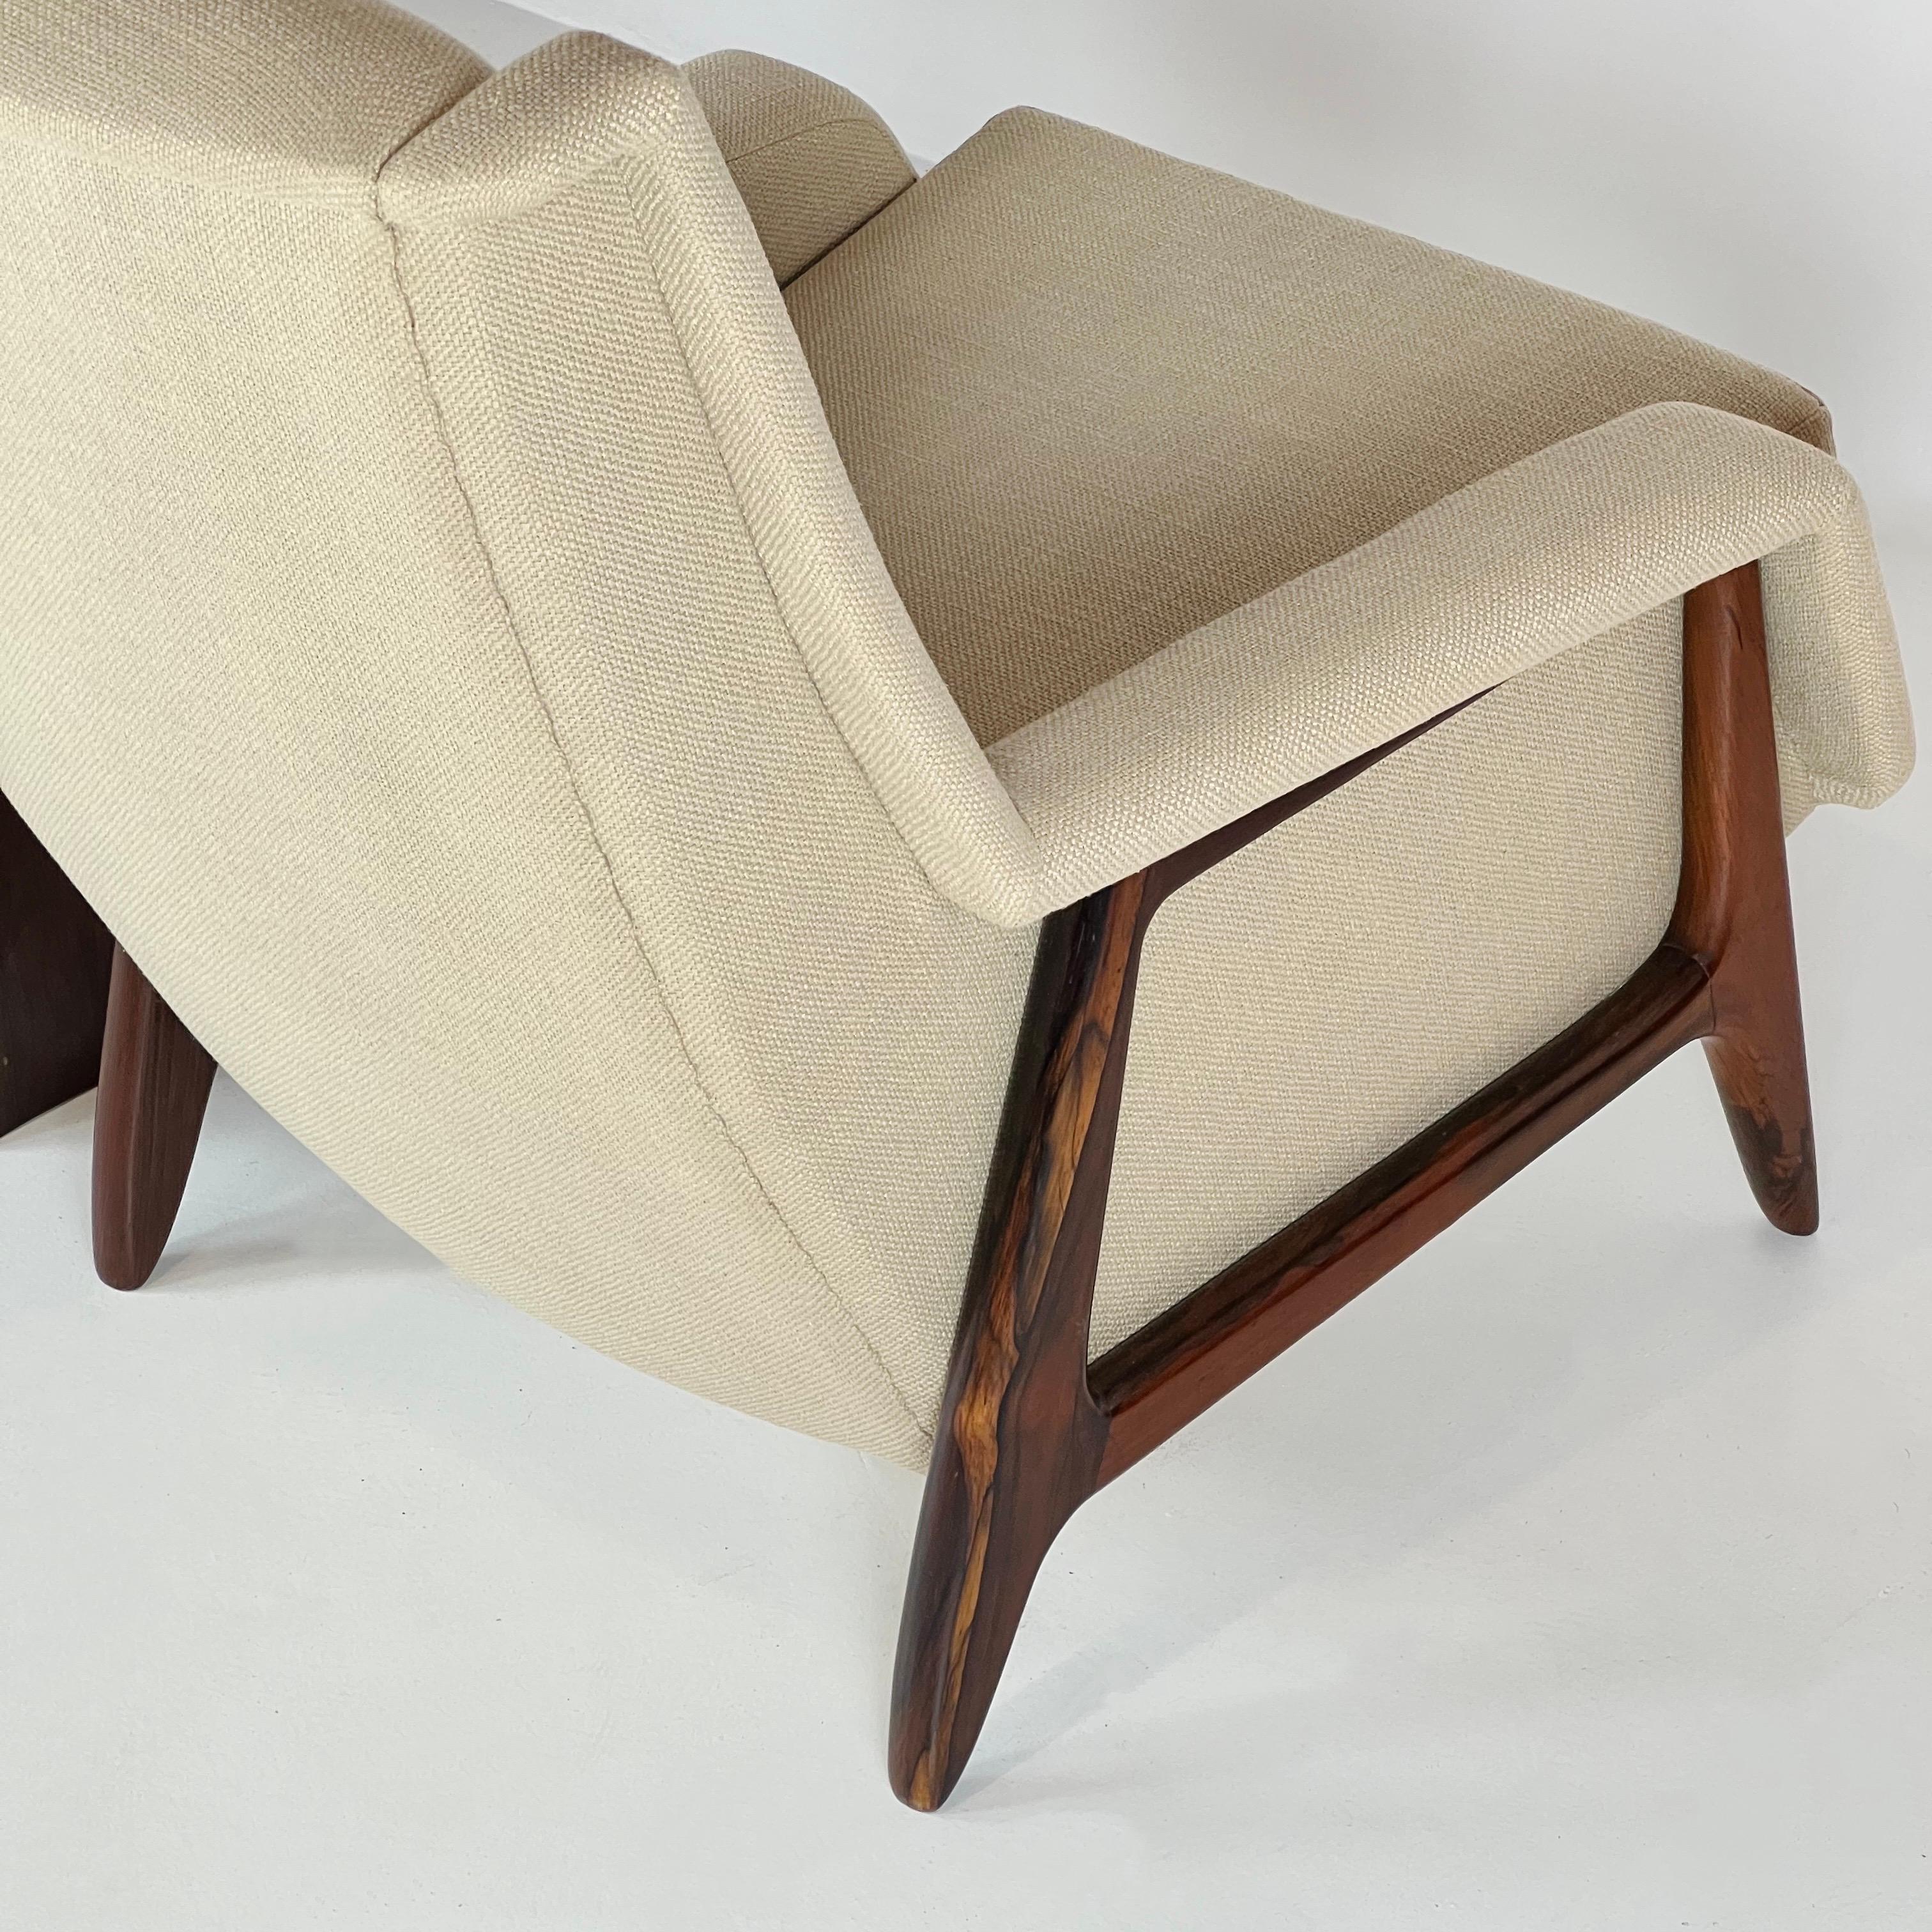 Created in 1956, this was the first upholstered armchair produced by Taba, a furniture factory founded by Sergio Rodrigues.

The restoration process only needed refinishing, which was done by our team at the finest details and preserving the